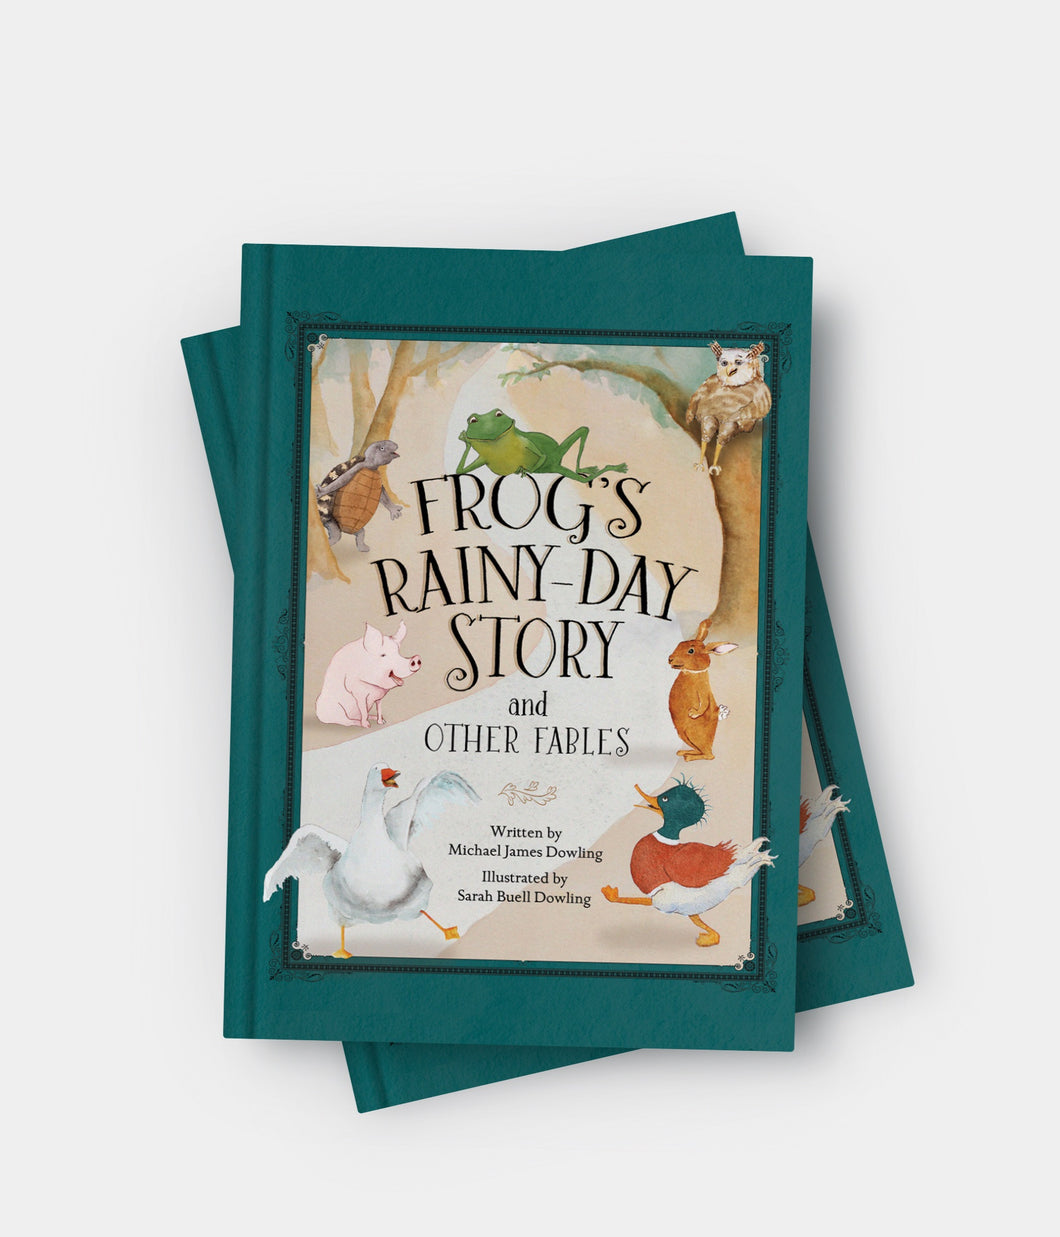 Frog's Rainy Day Story & Other Fables